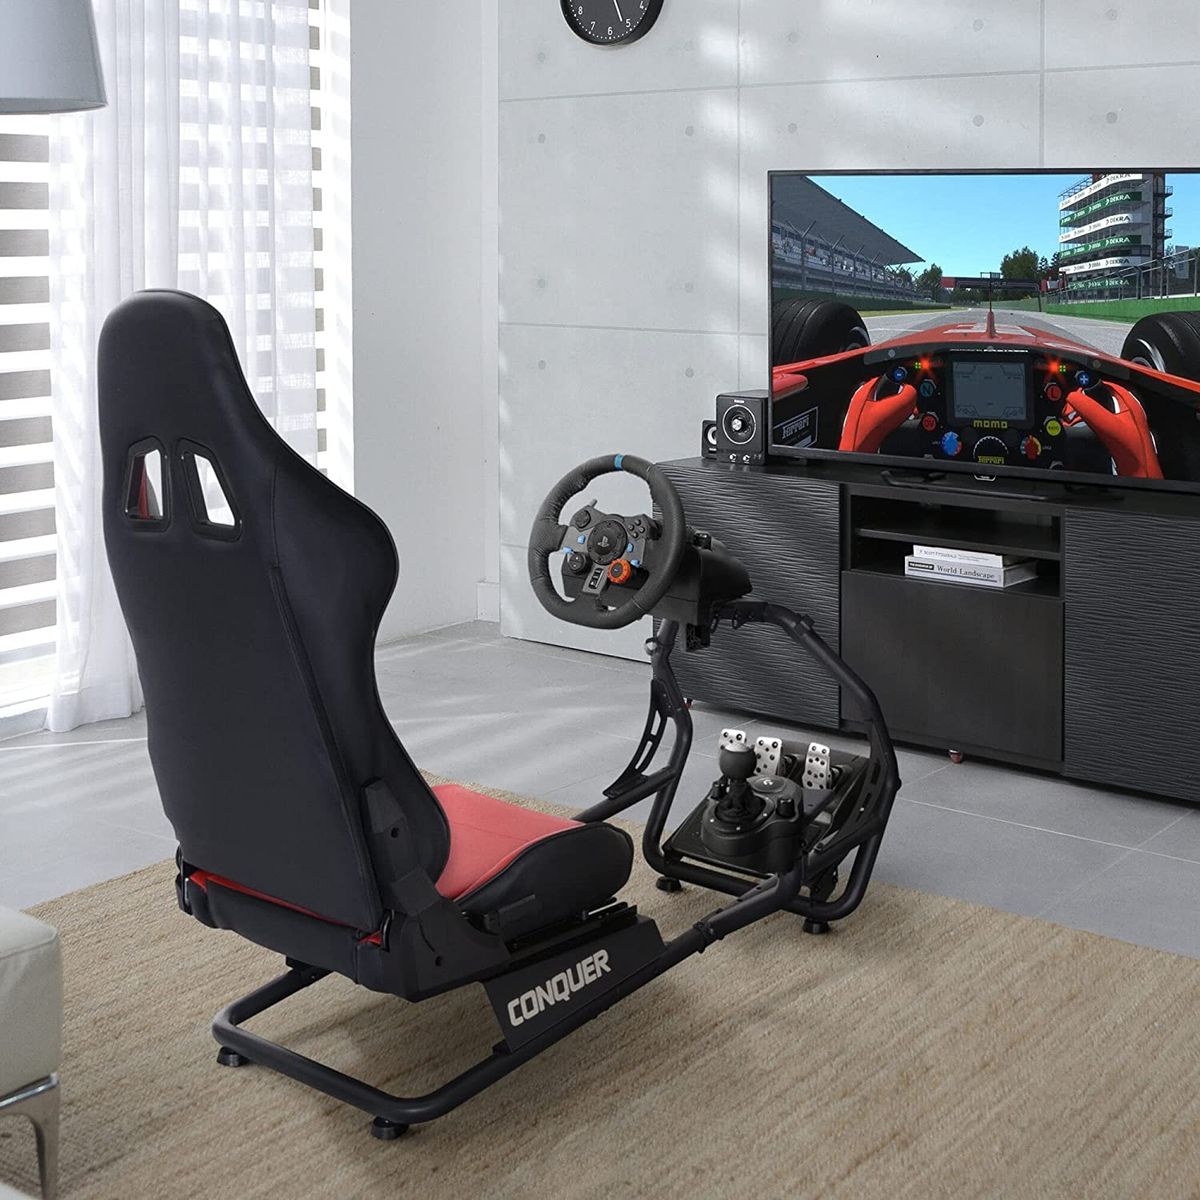 Take Your Racing Game to the Next Level With a Racing Wheel Stand